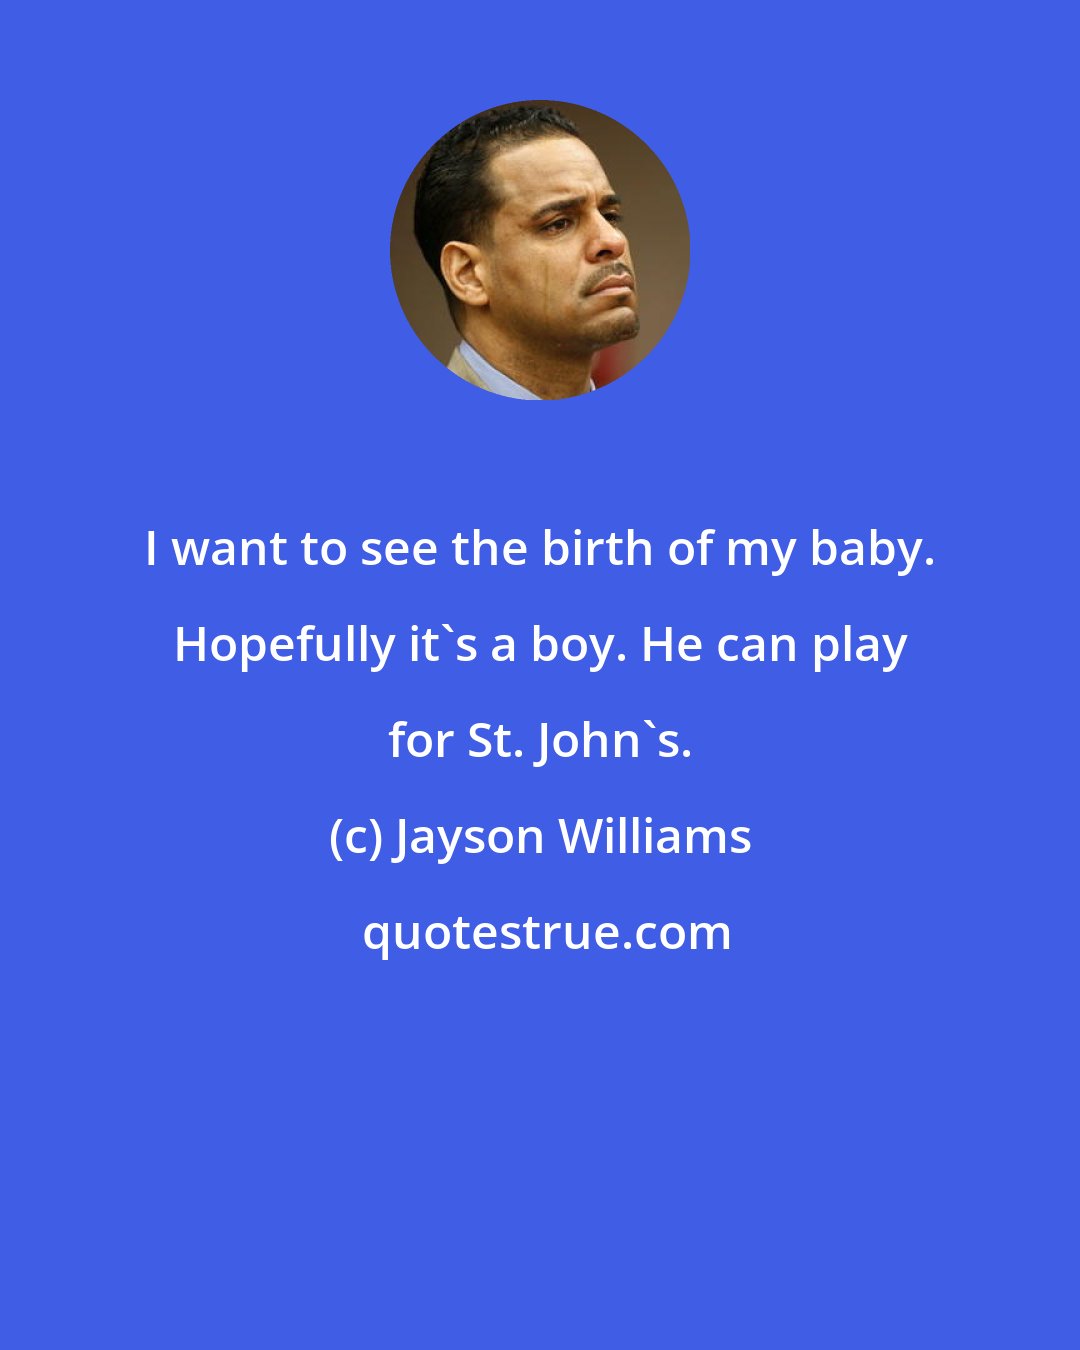 Jayson Williams: I want to see the birth of my baby. Hopefully it's a boy. He can play for St. John's.